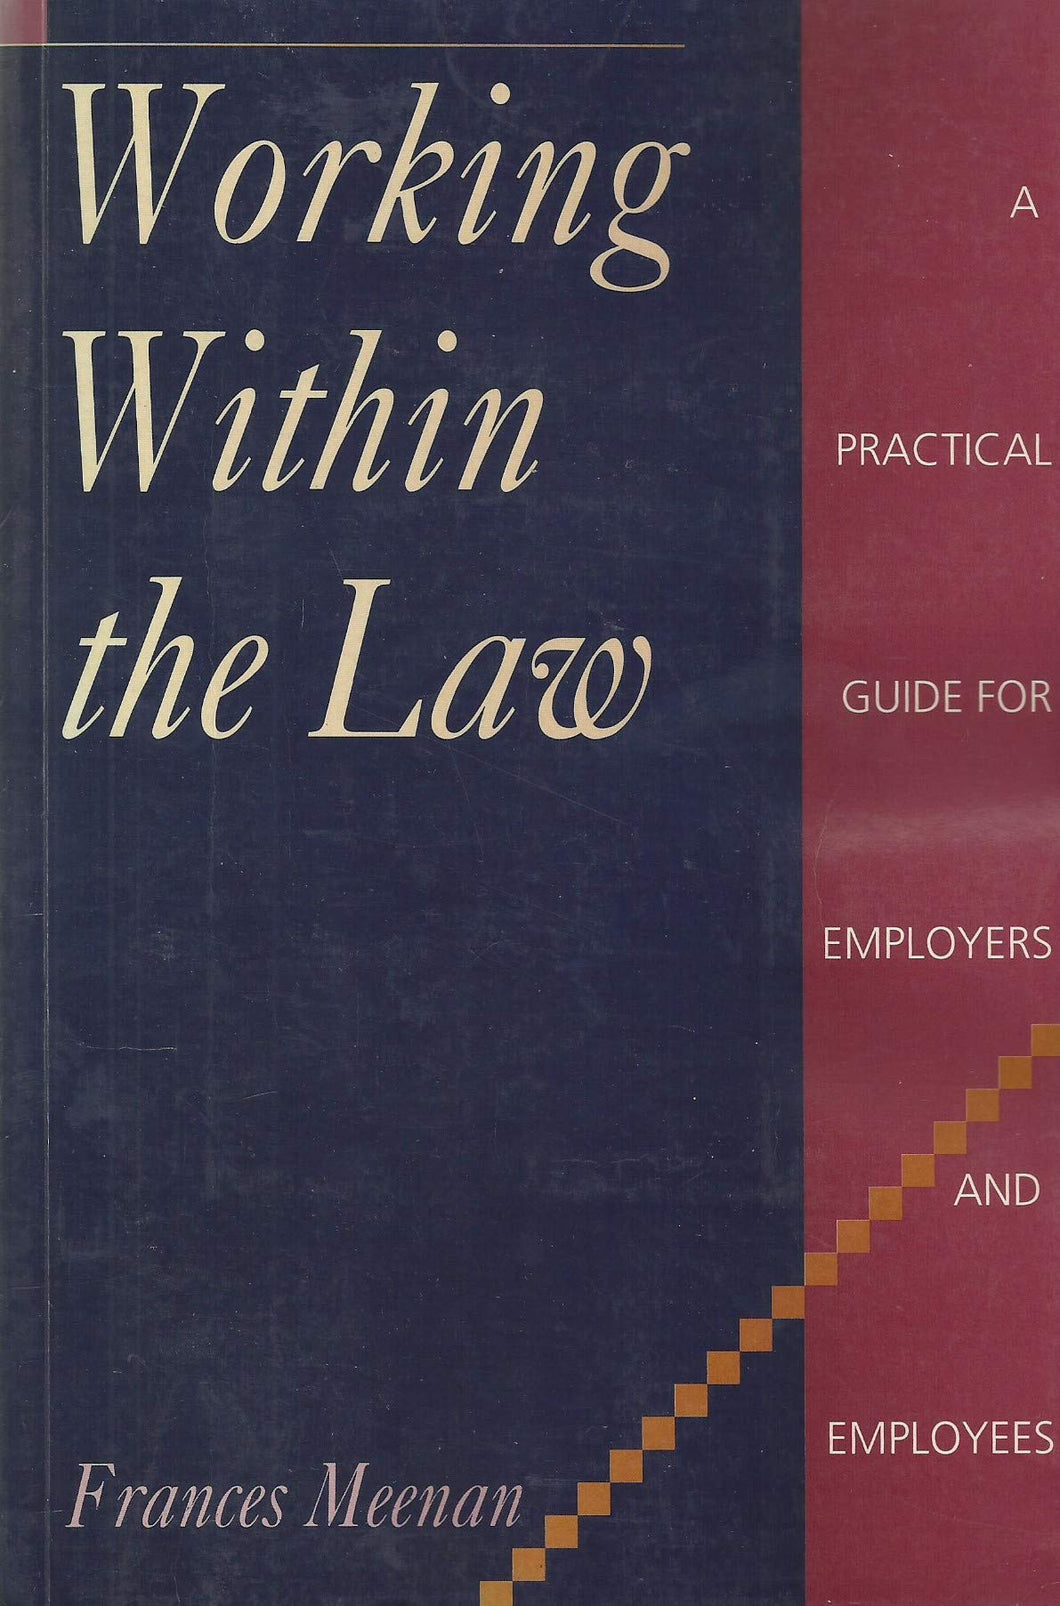 Working within the Law: A Practical Guide for Employers and Employees